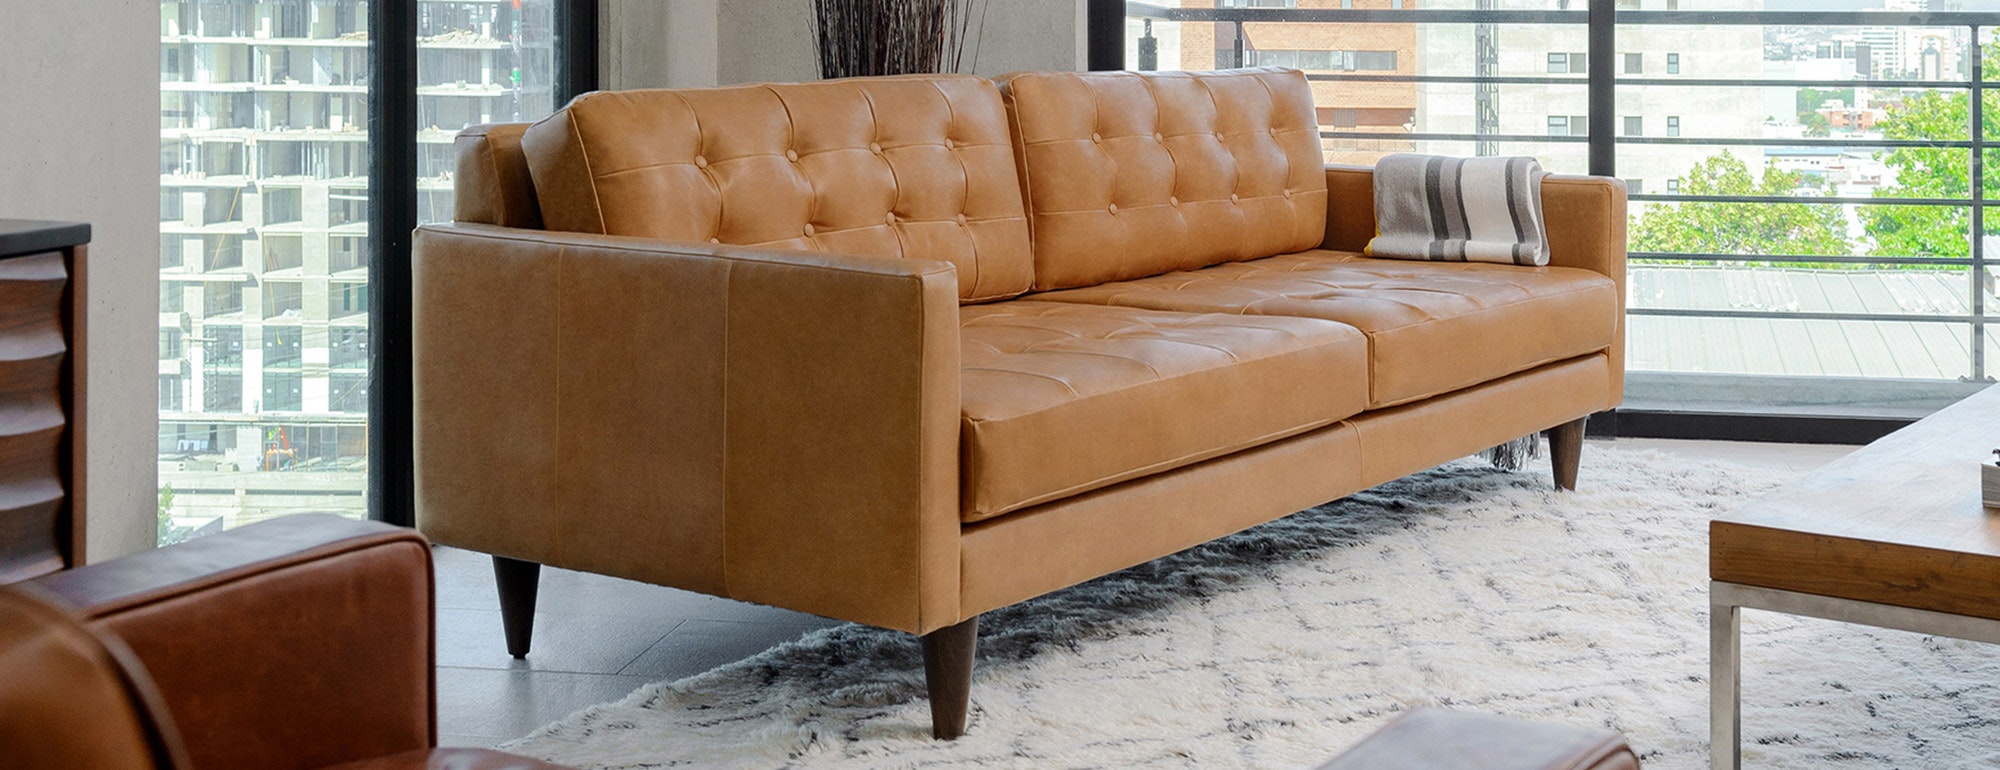 eliot leather sofa review